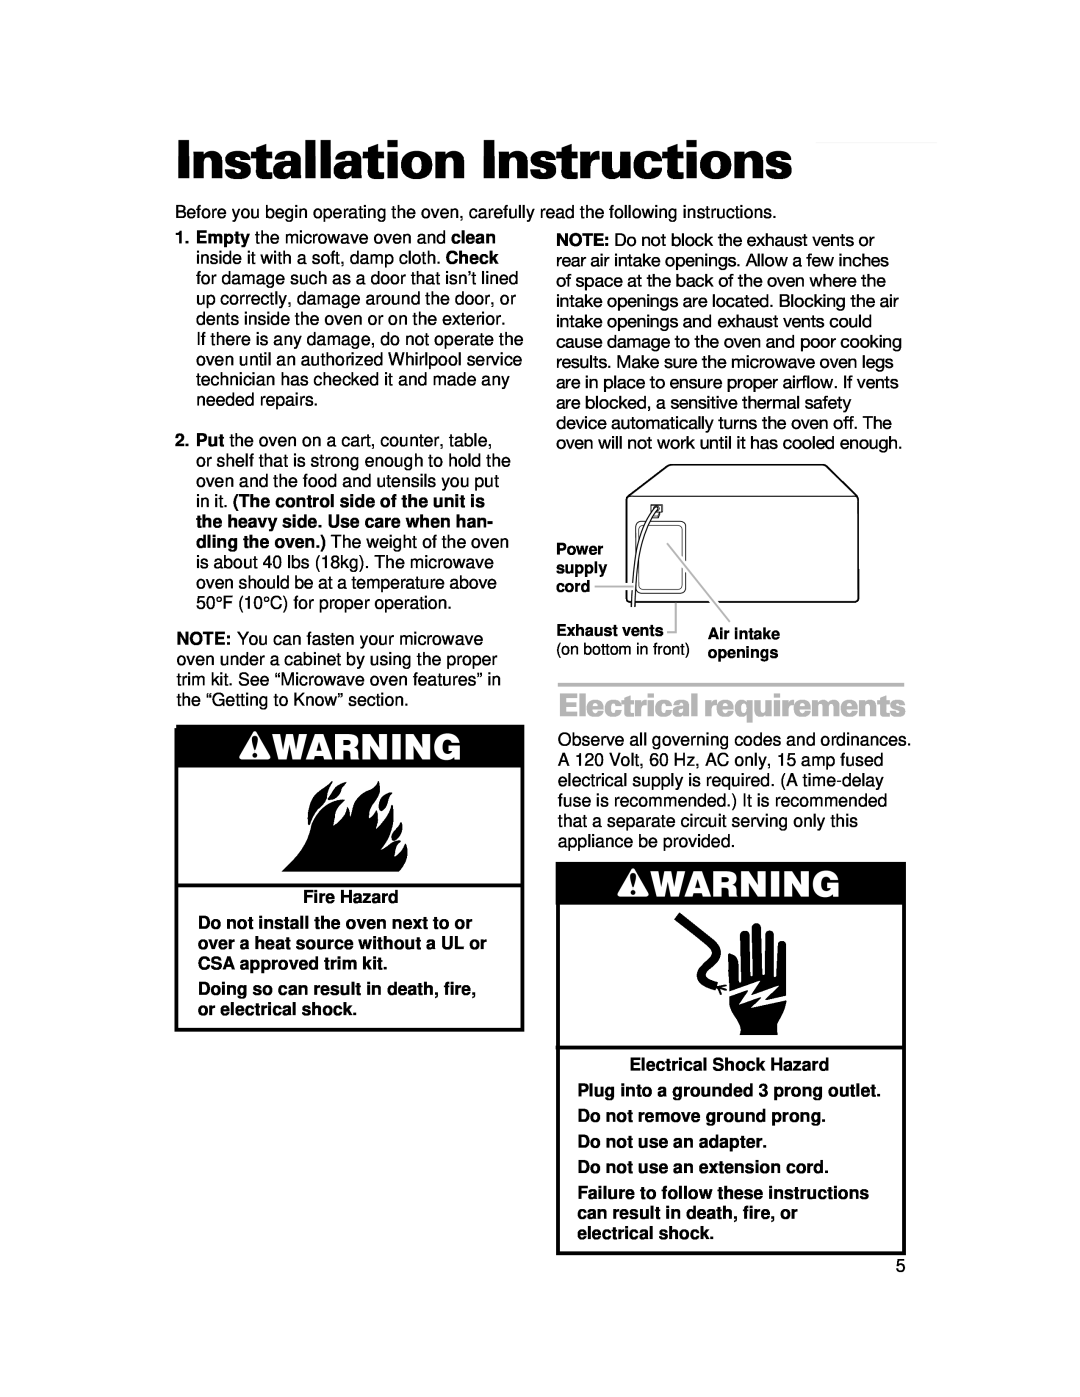 Whirlpool CMT061SG installation instructions Installation Instructions, wWARNING, Electrical requirements 